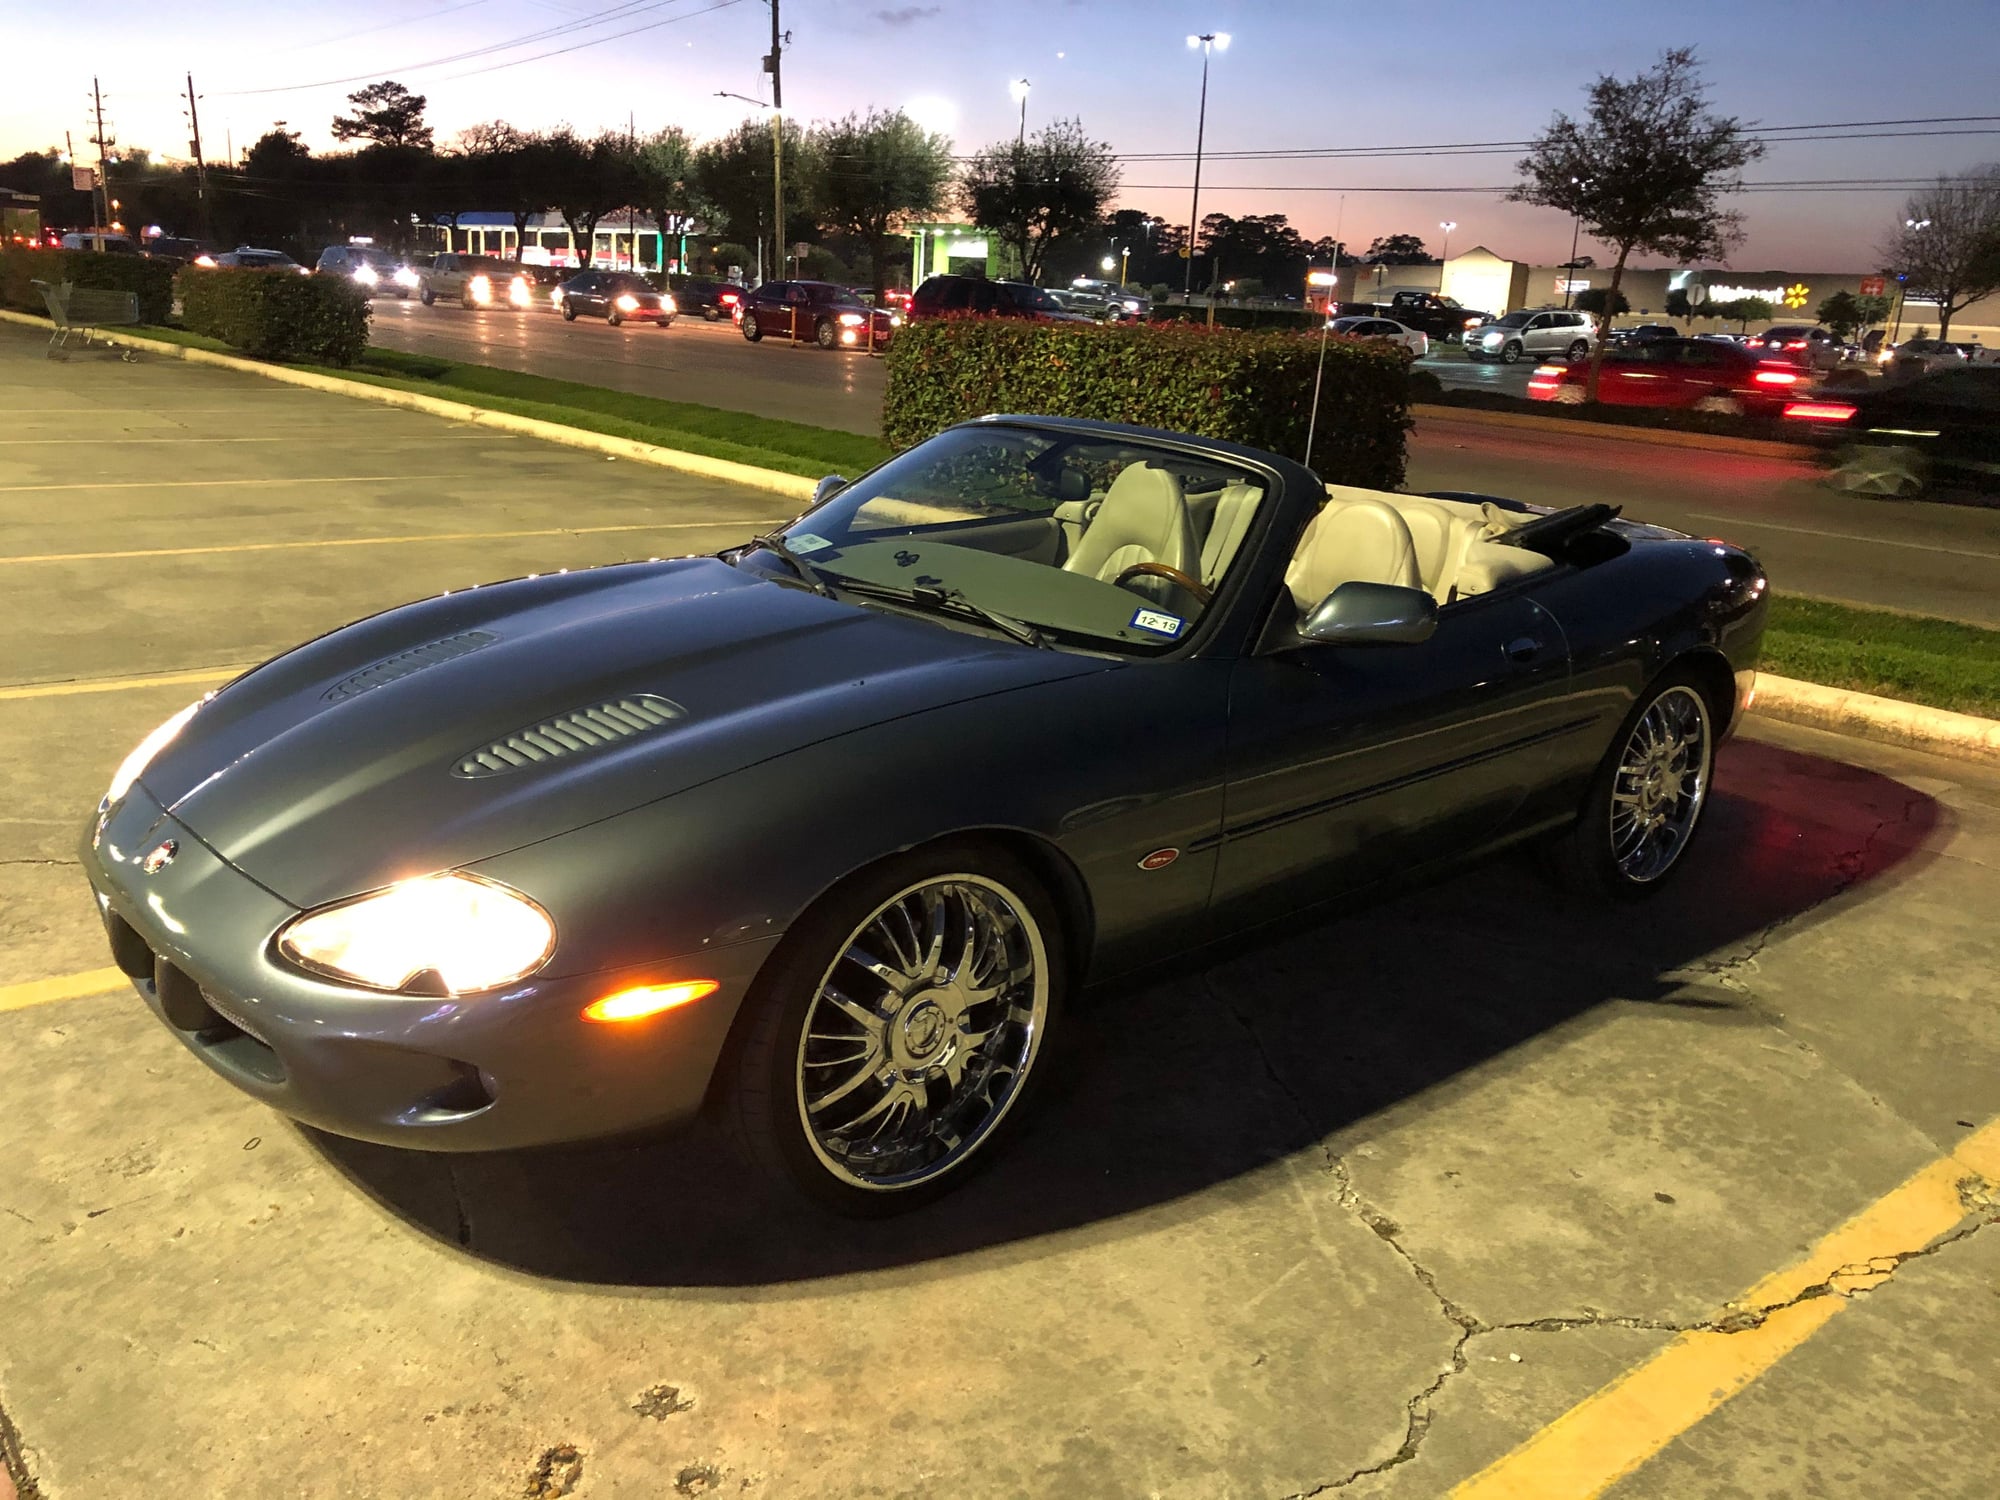 2000 Jaguar XKR - 2000 XKR convertible - Used - VIN SAJJA42B8YPA00665 - 119,000 Miles - 8 cyl - 2WD - Automatic - Convertible - Other - Houston, TX 77069, United States